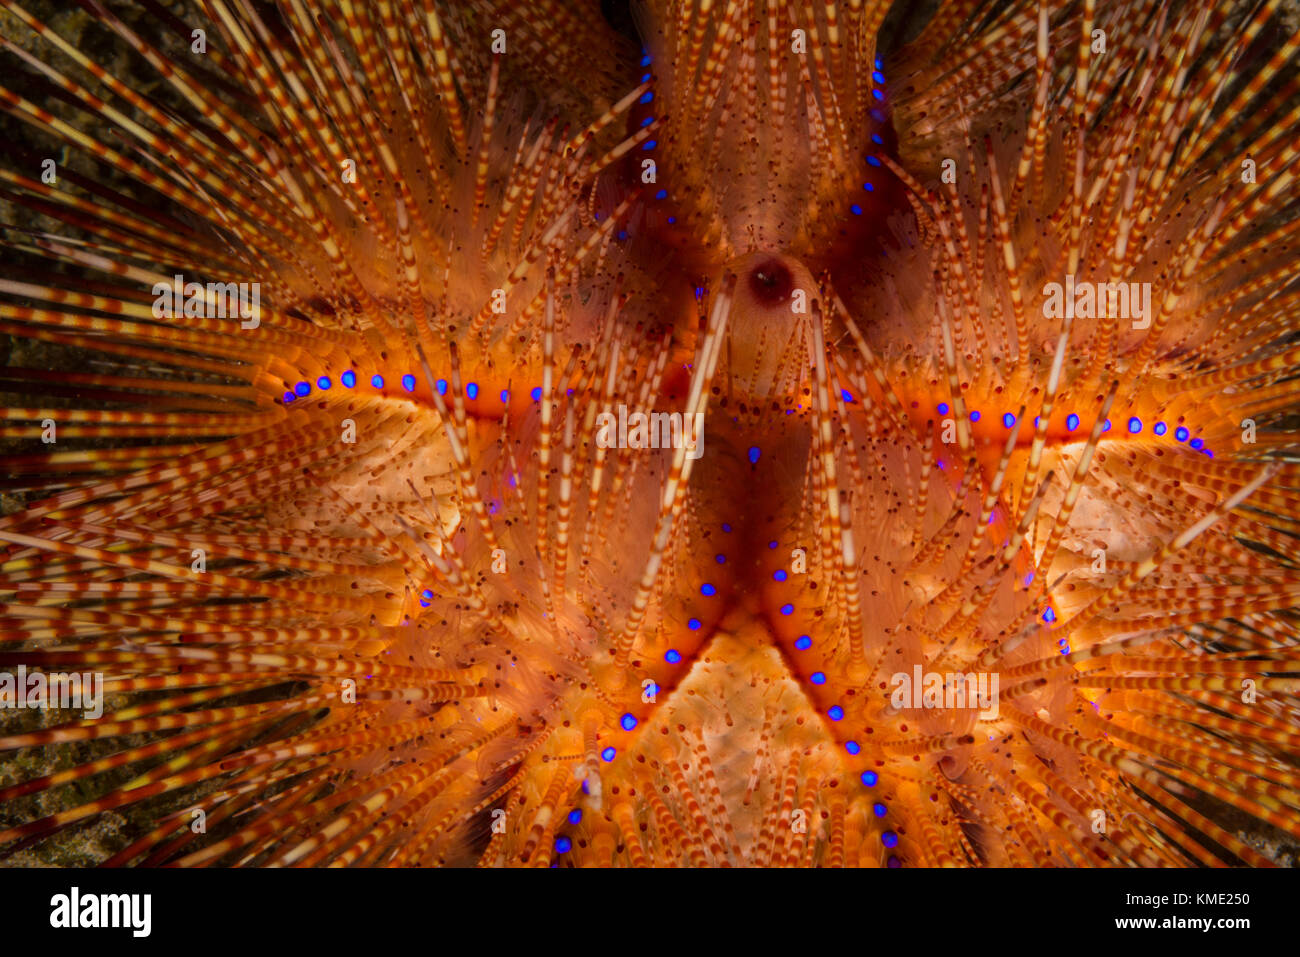 Detail of a blue-spotted sea urchin Stock Photo